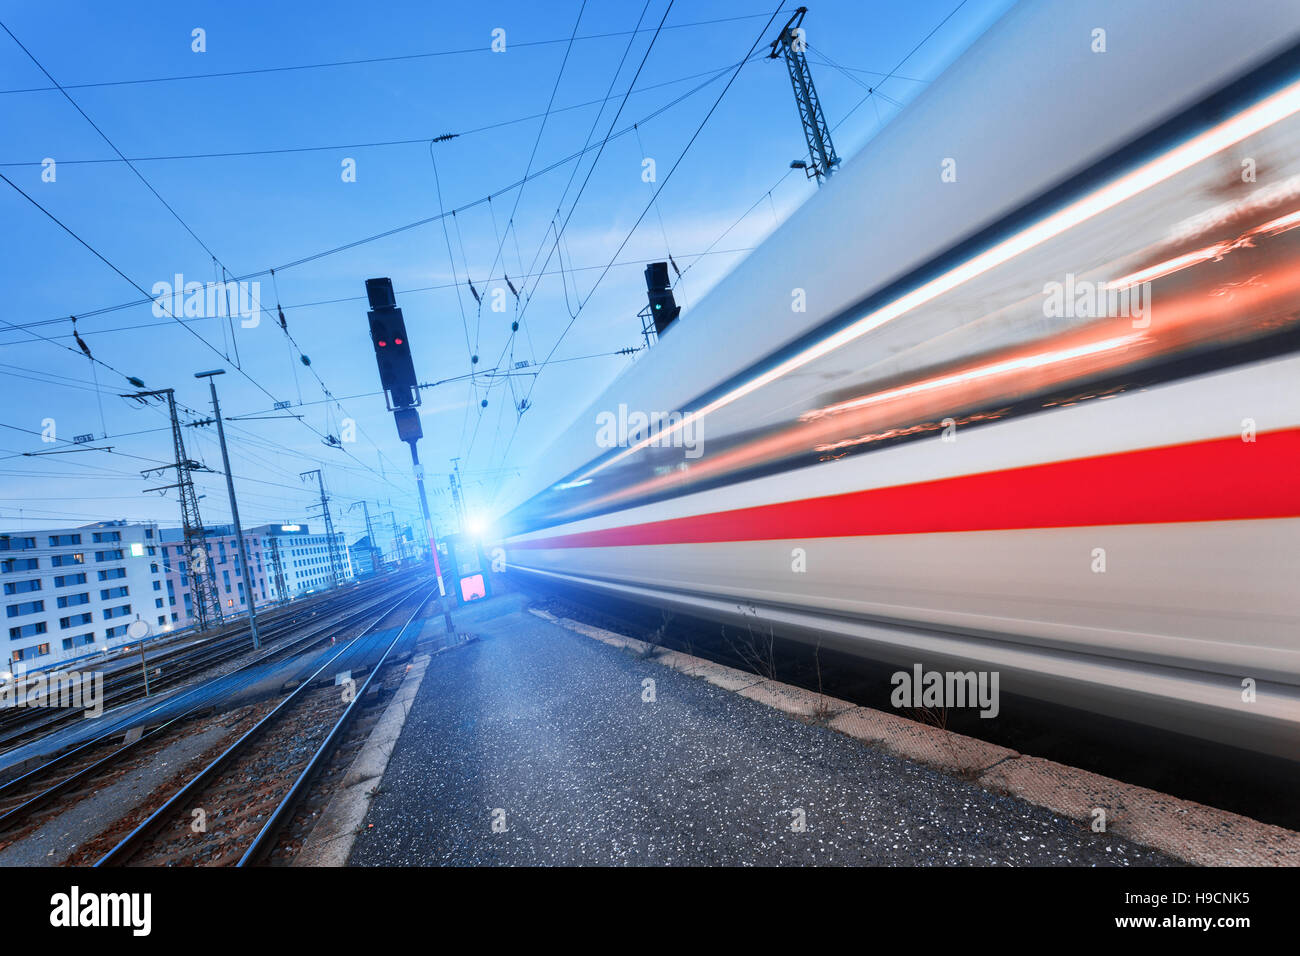 Modern high speed passenger train on railroad in motion at sunset. Blurred commuter train. Railway station at dusk. vintage Stock Photo